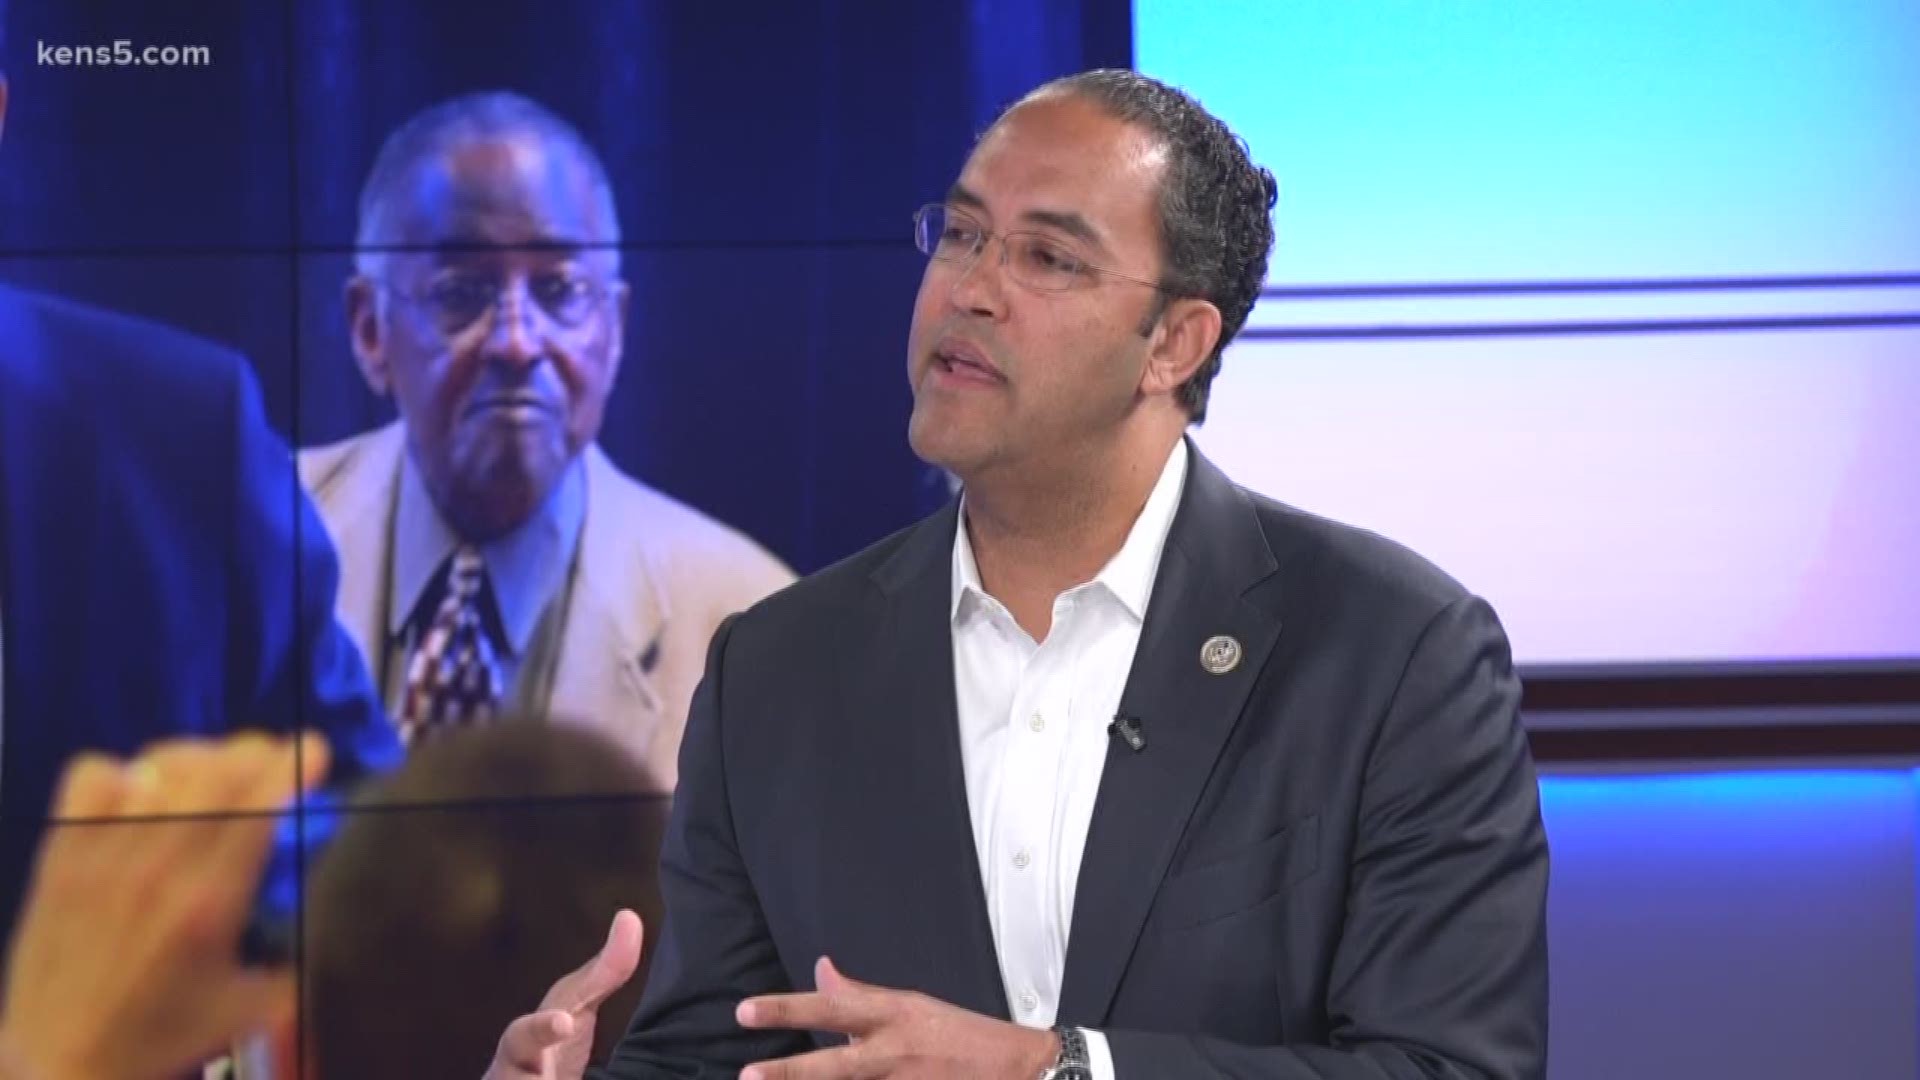 We submitted your questions to Congressman Will Hurd.